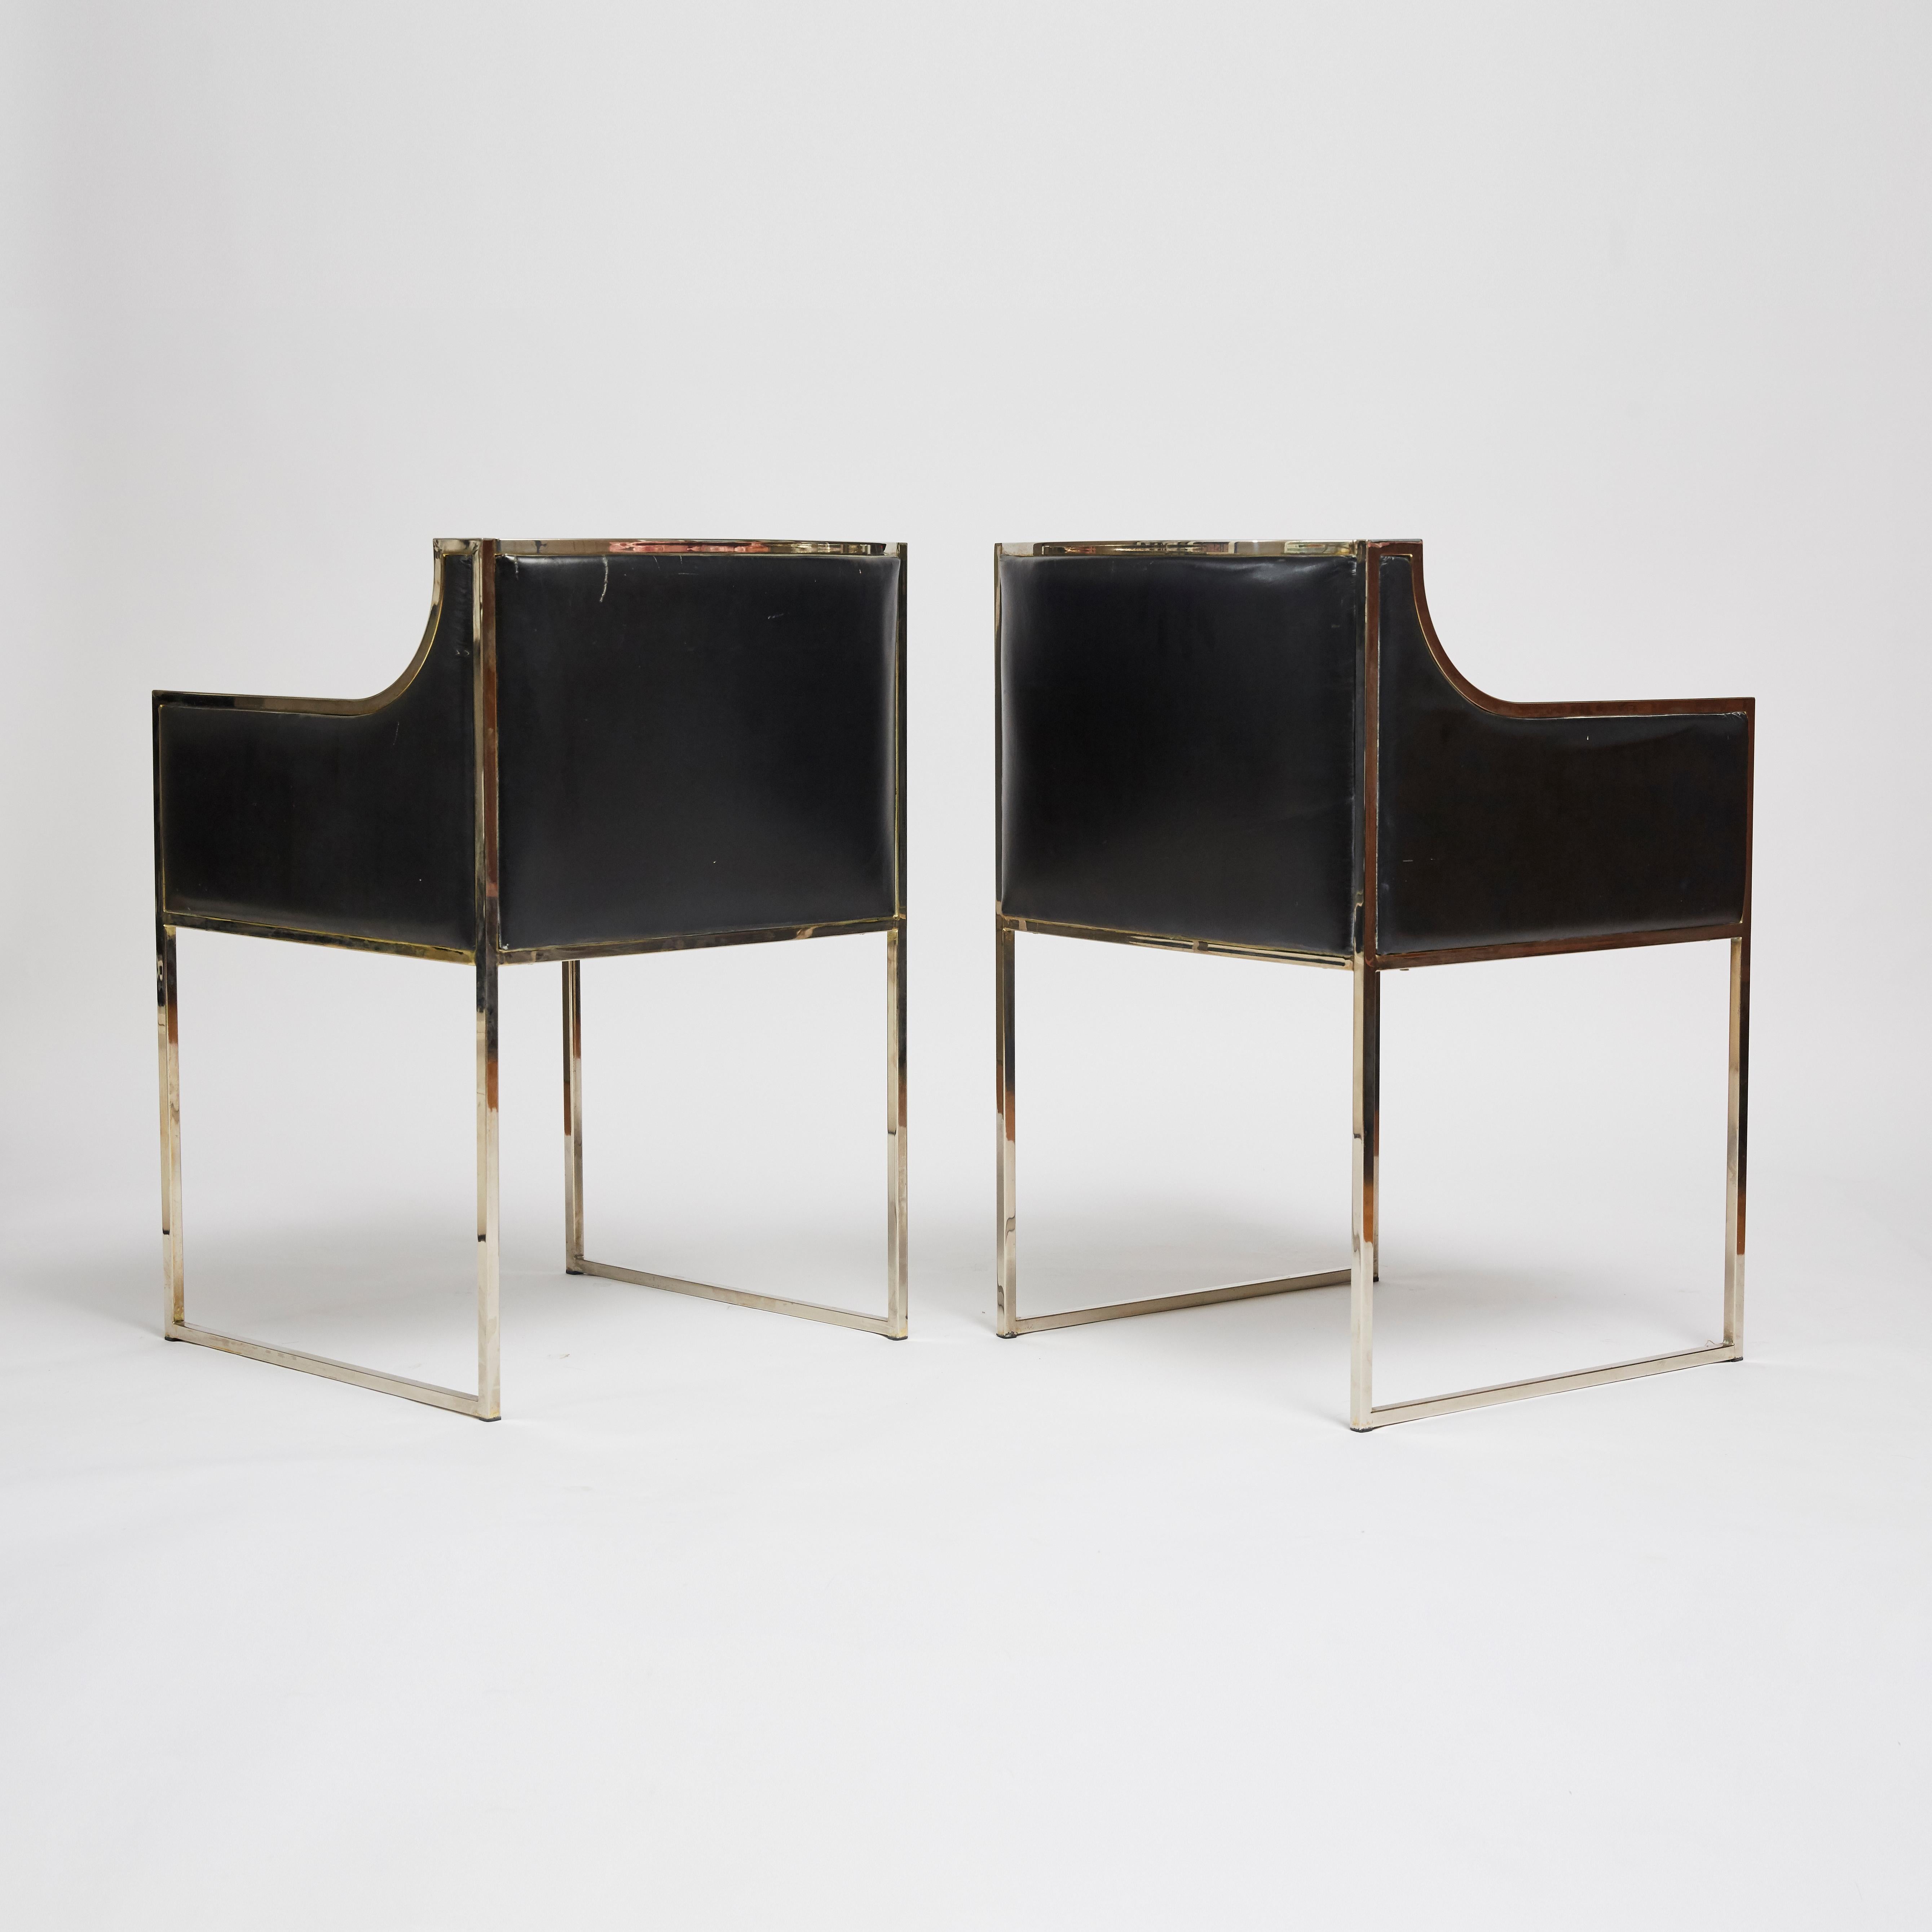 Pair of 1970s Italian Vintage Chairs in Original Black Leather with Chrome Frame In Good Condition For Sale In London, GB